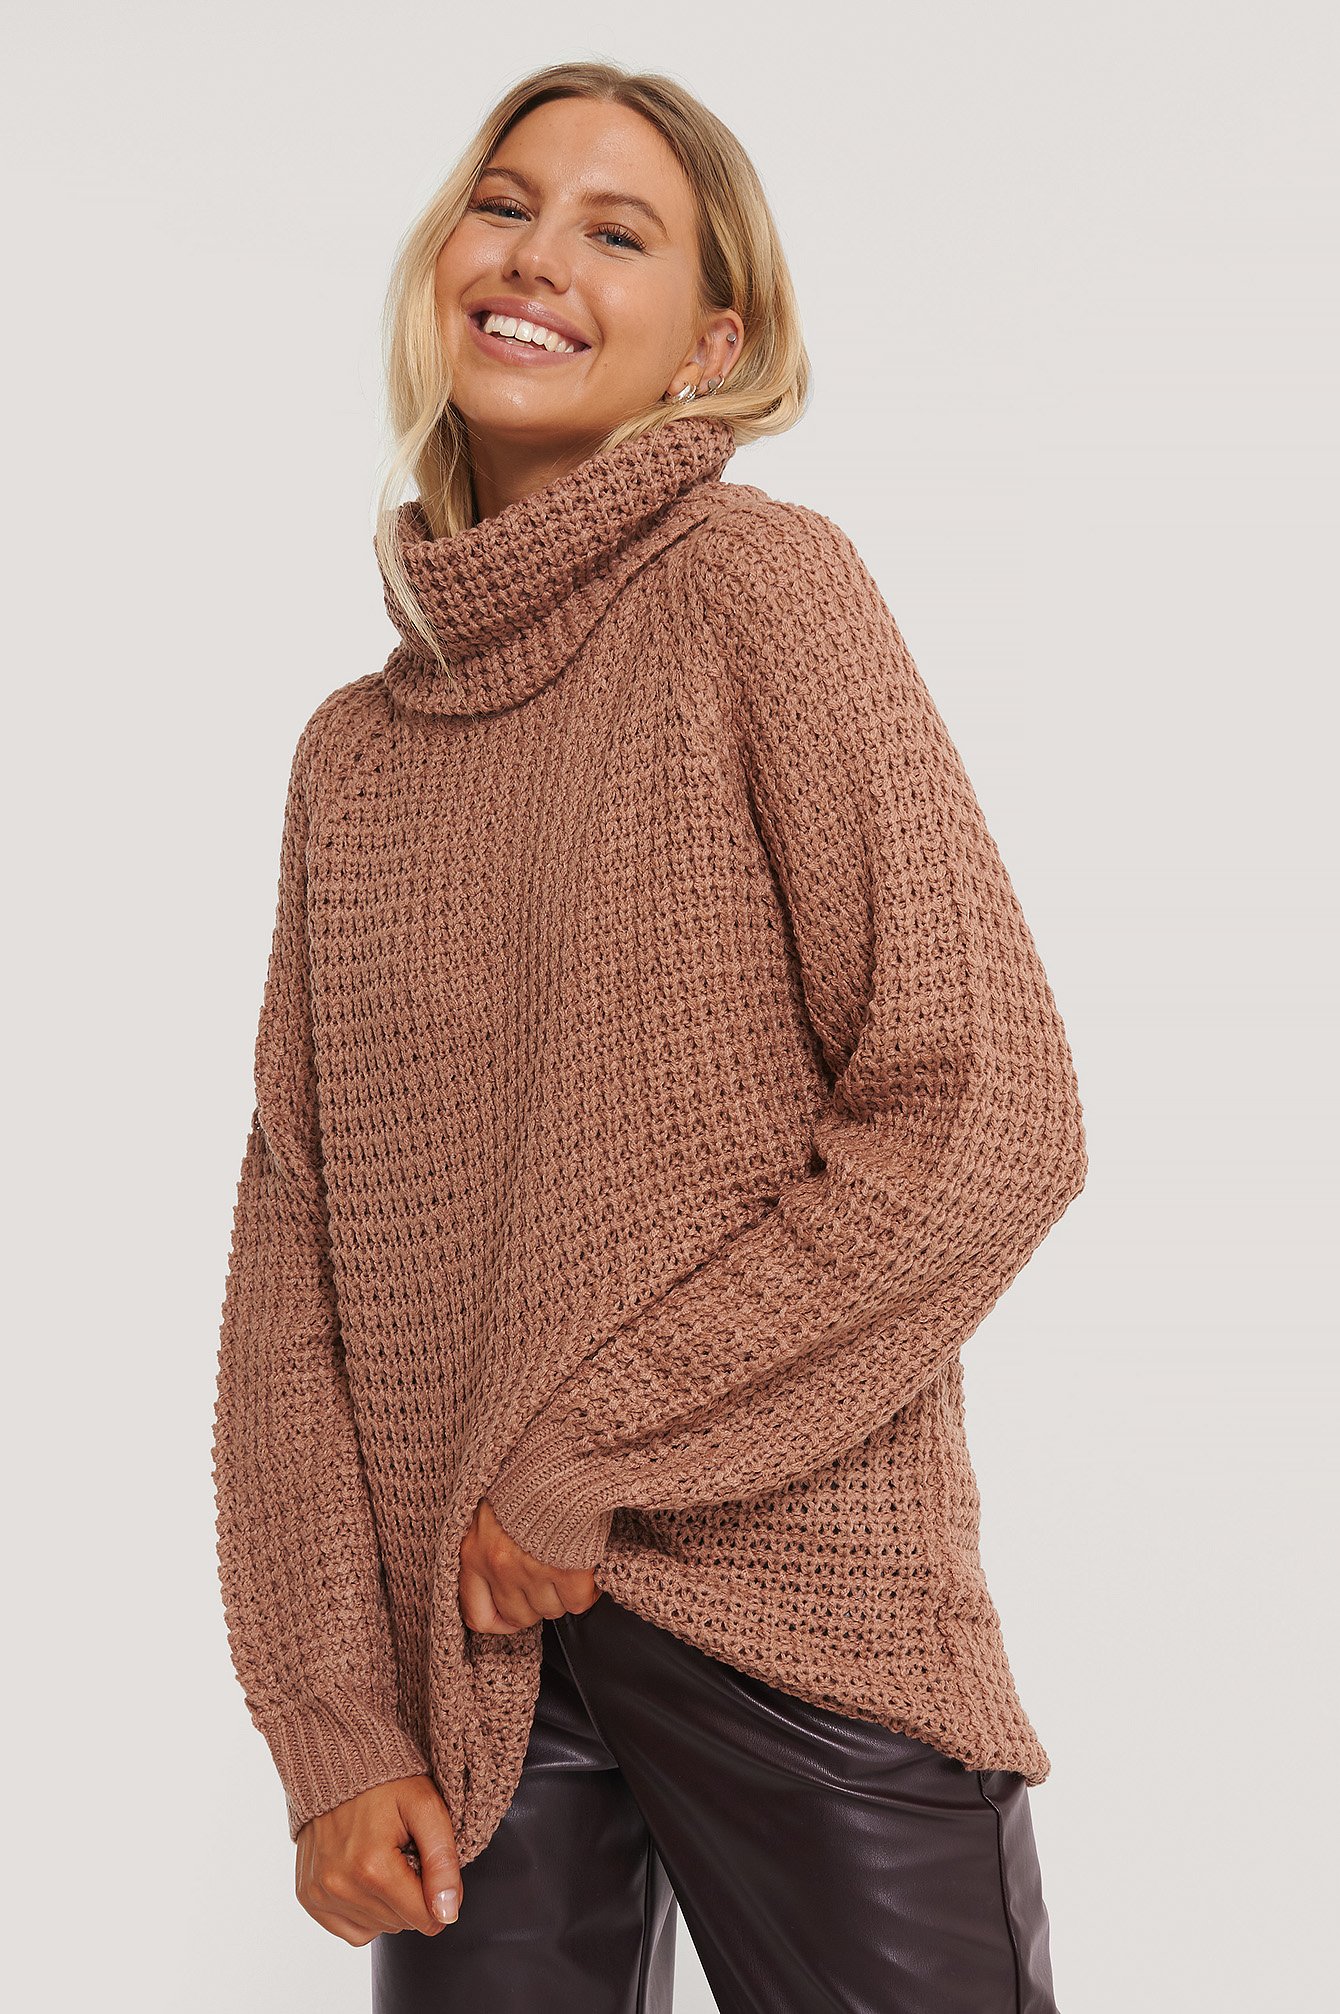 Dusty Pink High Neck Pineapple Knitted Sweater